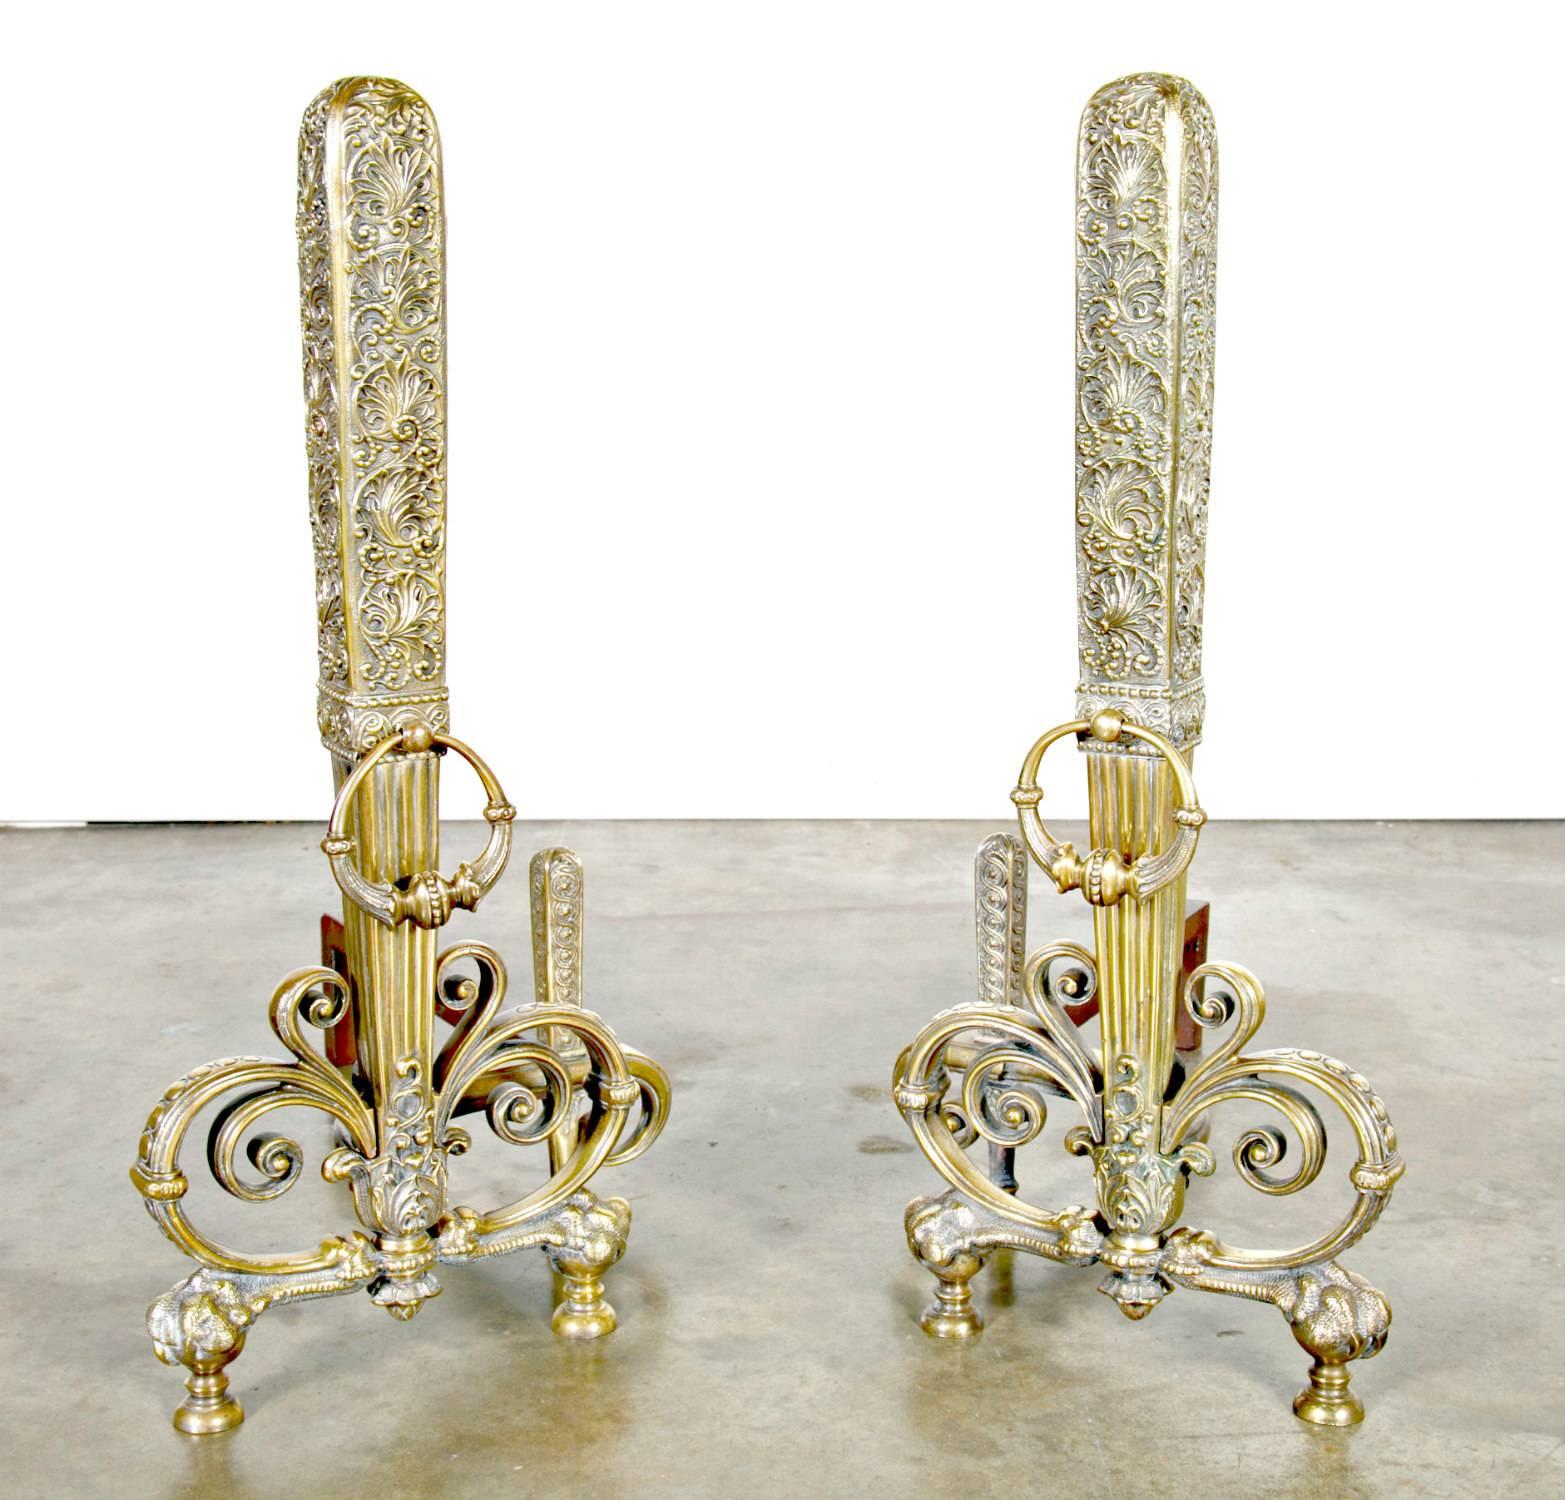 An exceptional pair of tall patinated brass and wrought iron andirons ornamented with stylized interlaced scrolls, having original ornamented circular handles, attributed to Tiffany Studios, circa 1890s. These rare and collectible andirons are